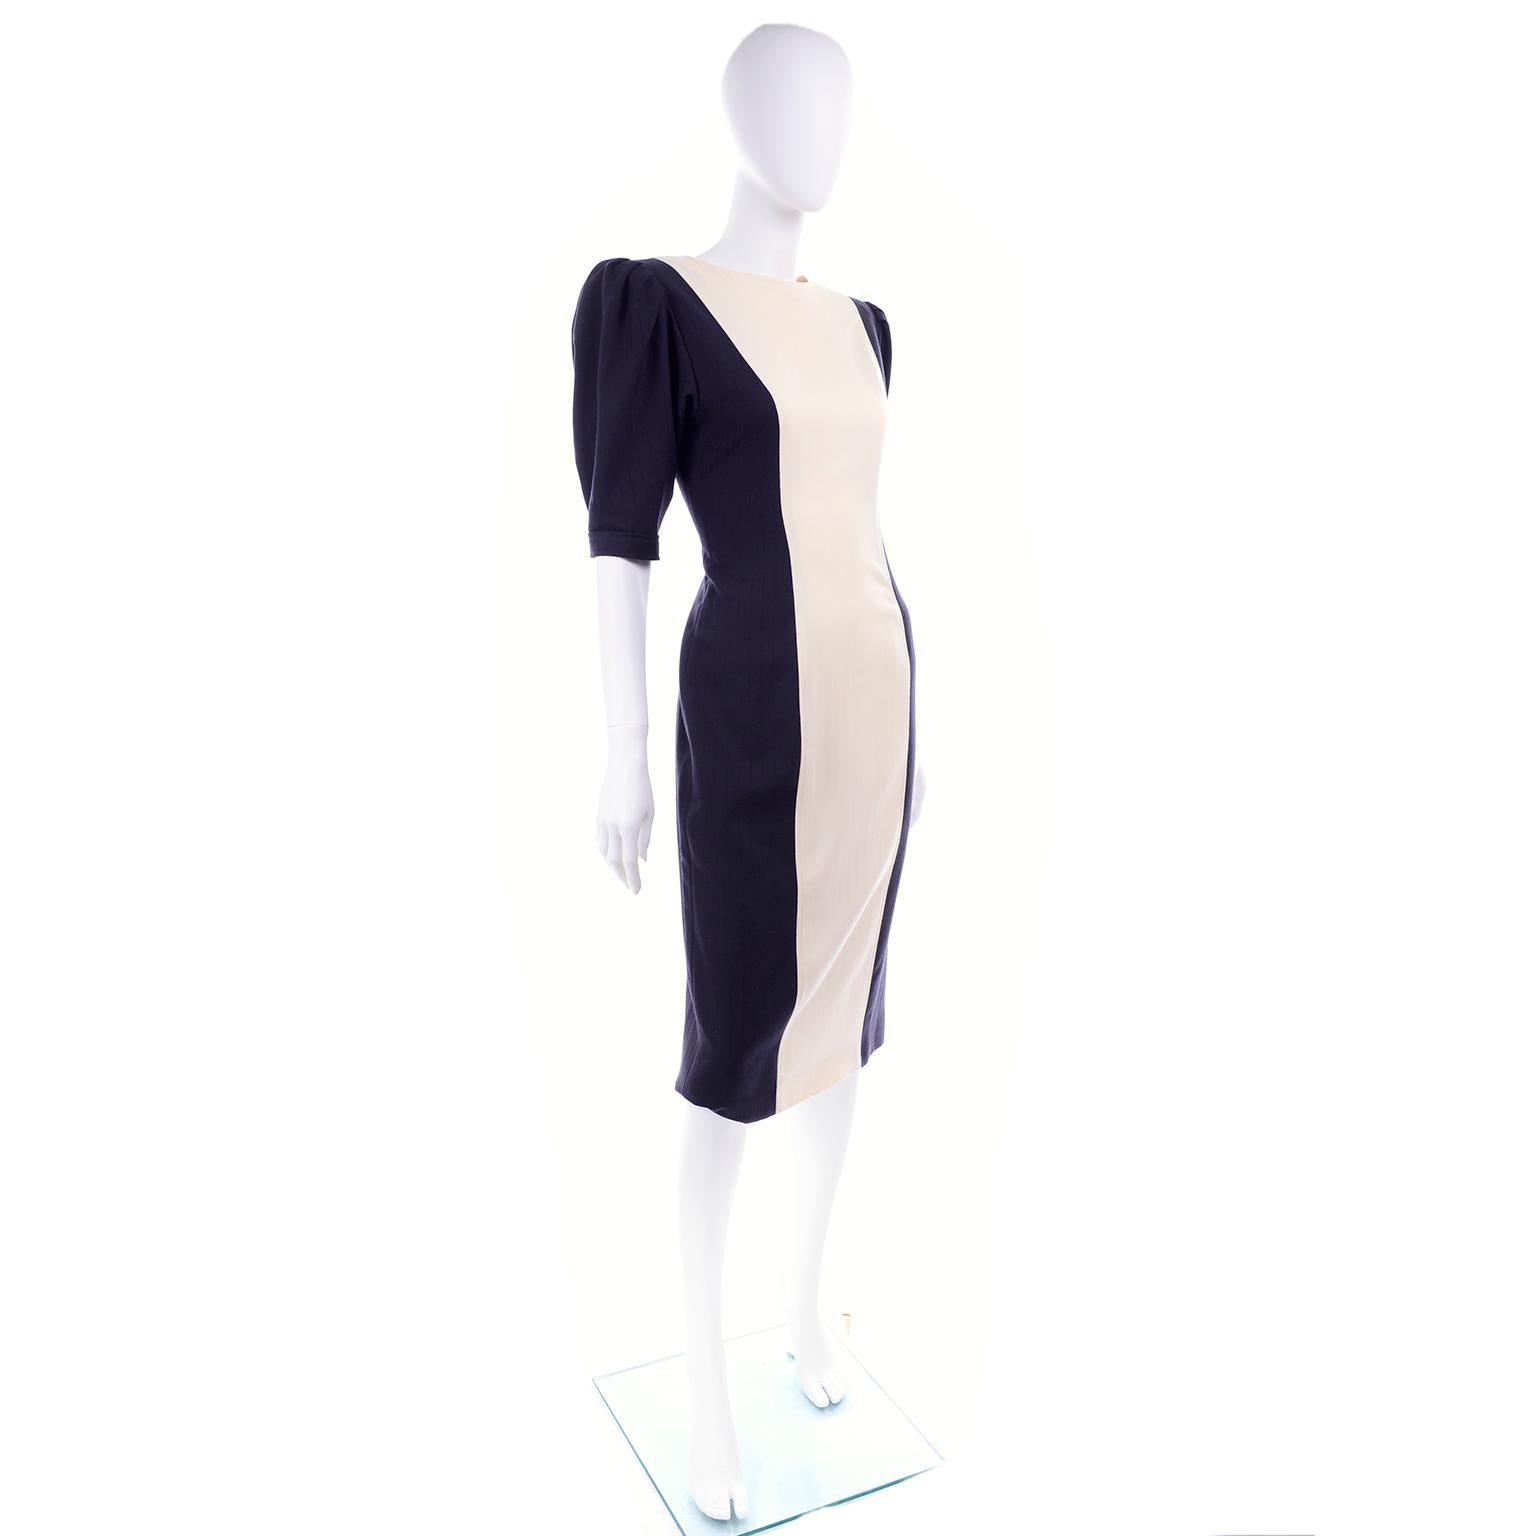 This is a vintage Navy and Cream textural striped Ungaro sheath dress with its original tags from I.Magnin from 1987. This vintage lightweight wool day dress has a jewel neckline, a gorgeous cut out in the back and sleeves that hit just above the